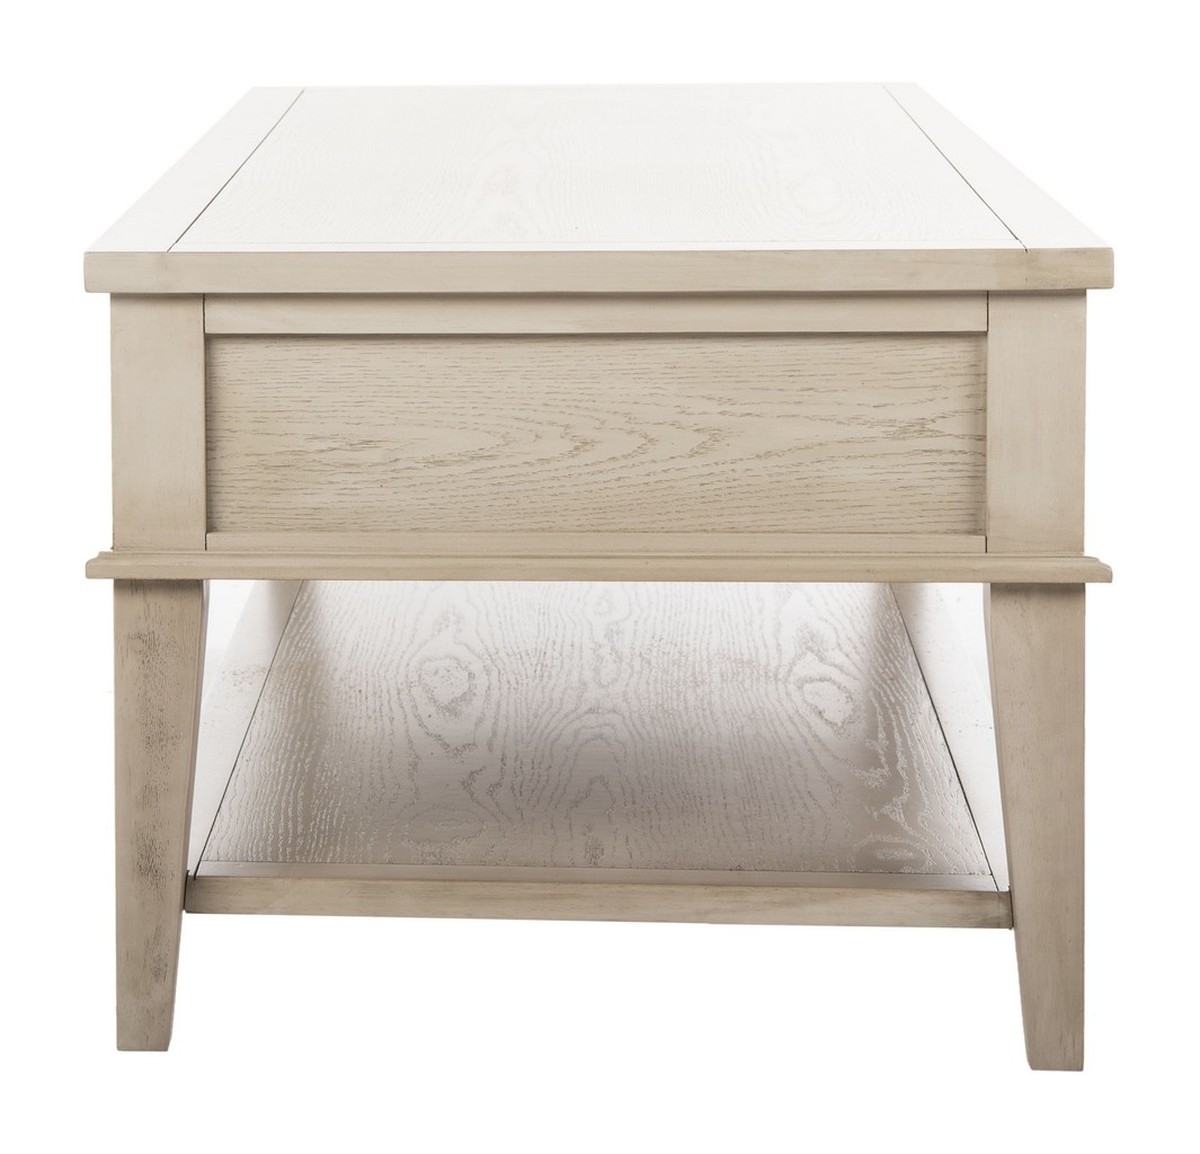 Manelin Coffee Table With Storage Drawers - White Wash - Arlo Home - Image 1